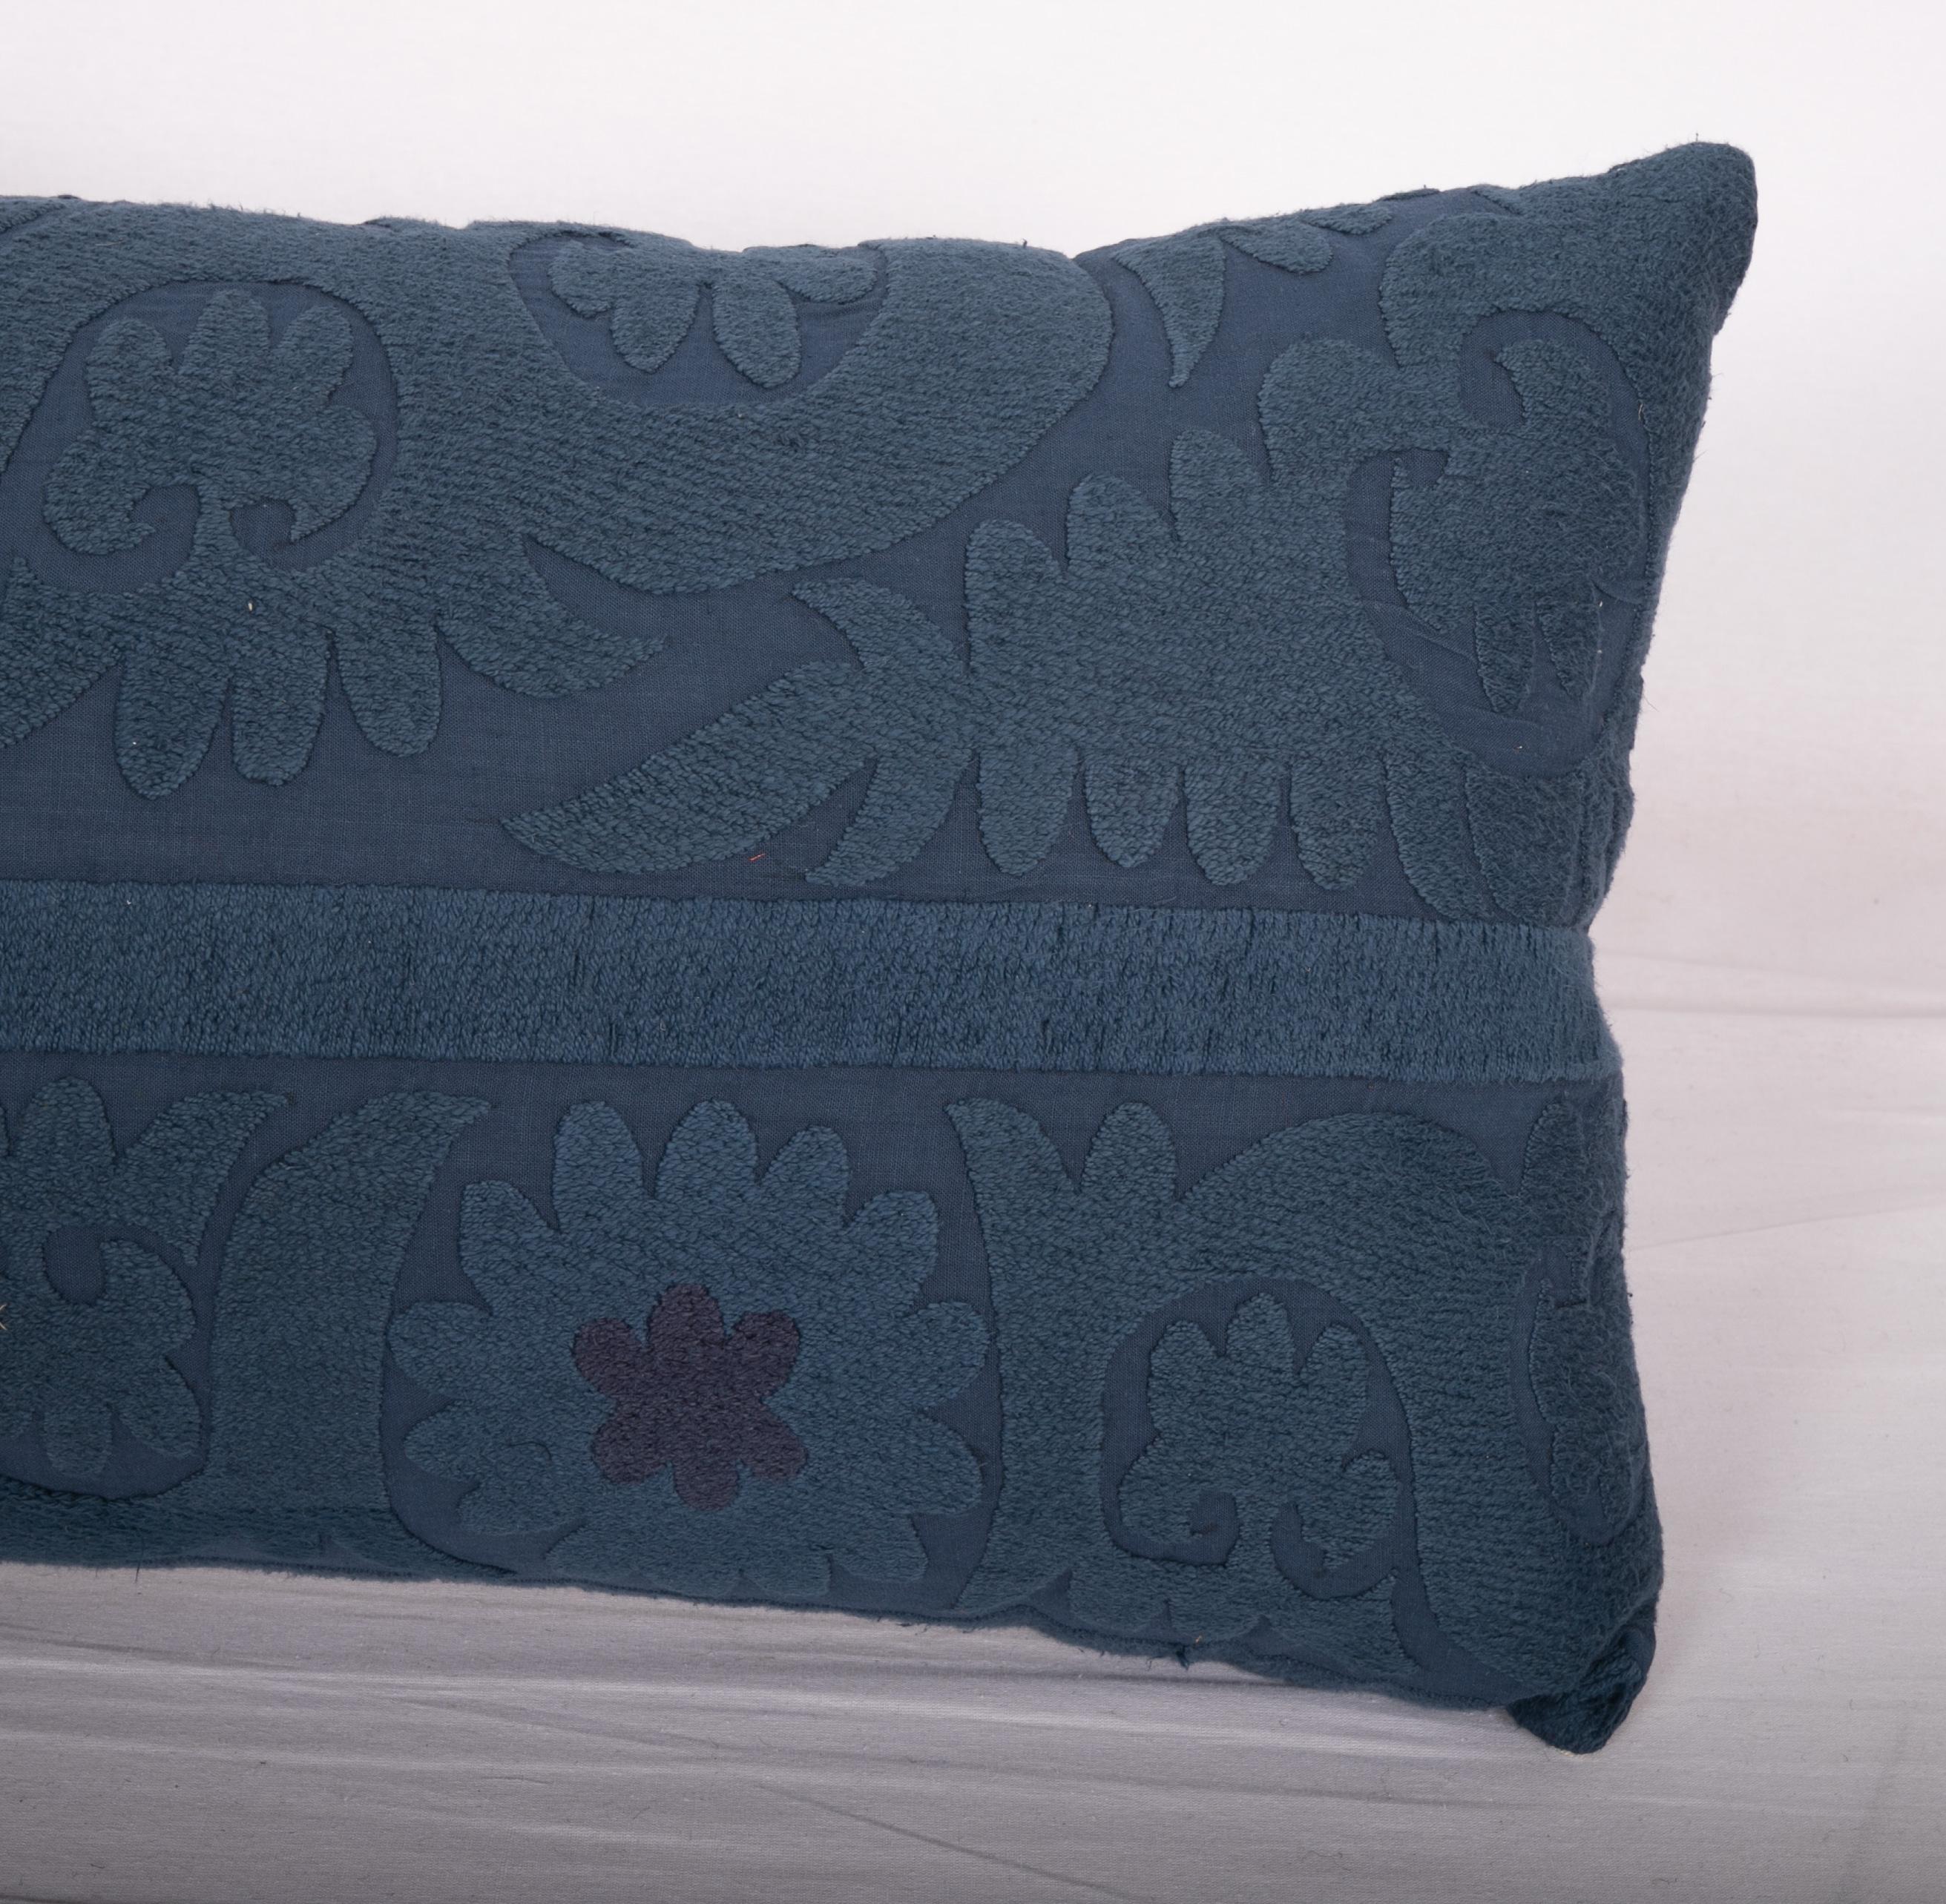 Embroidered Overdyed Vintage Suzani Pillow Case, Mid-20th Century